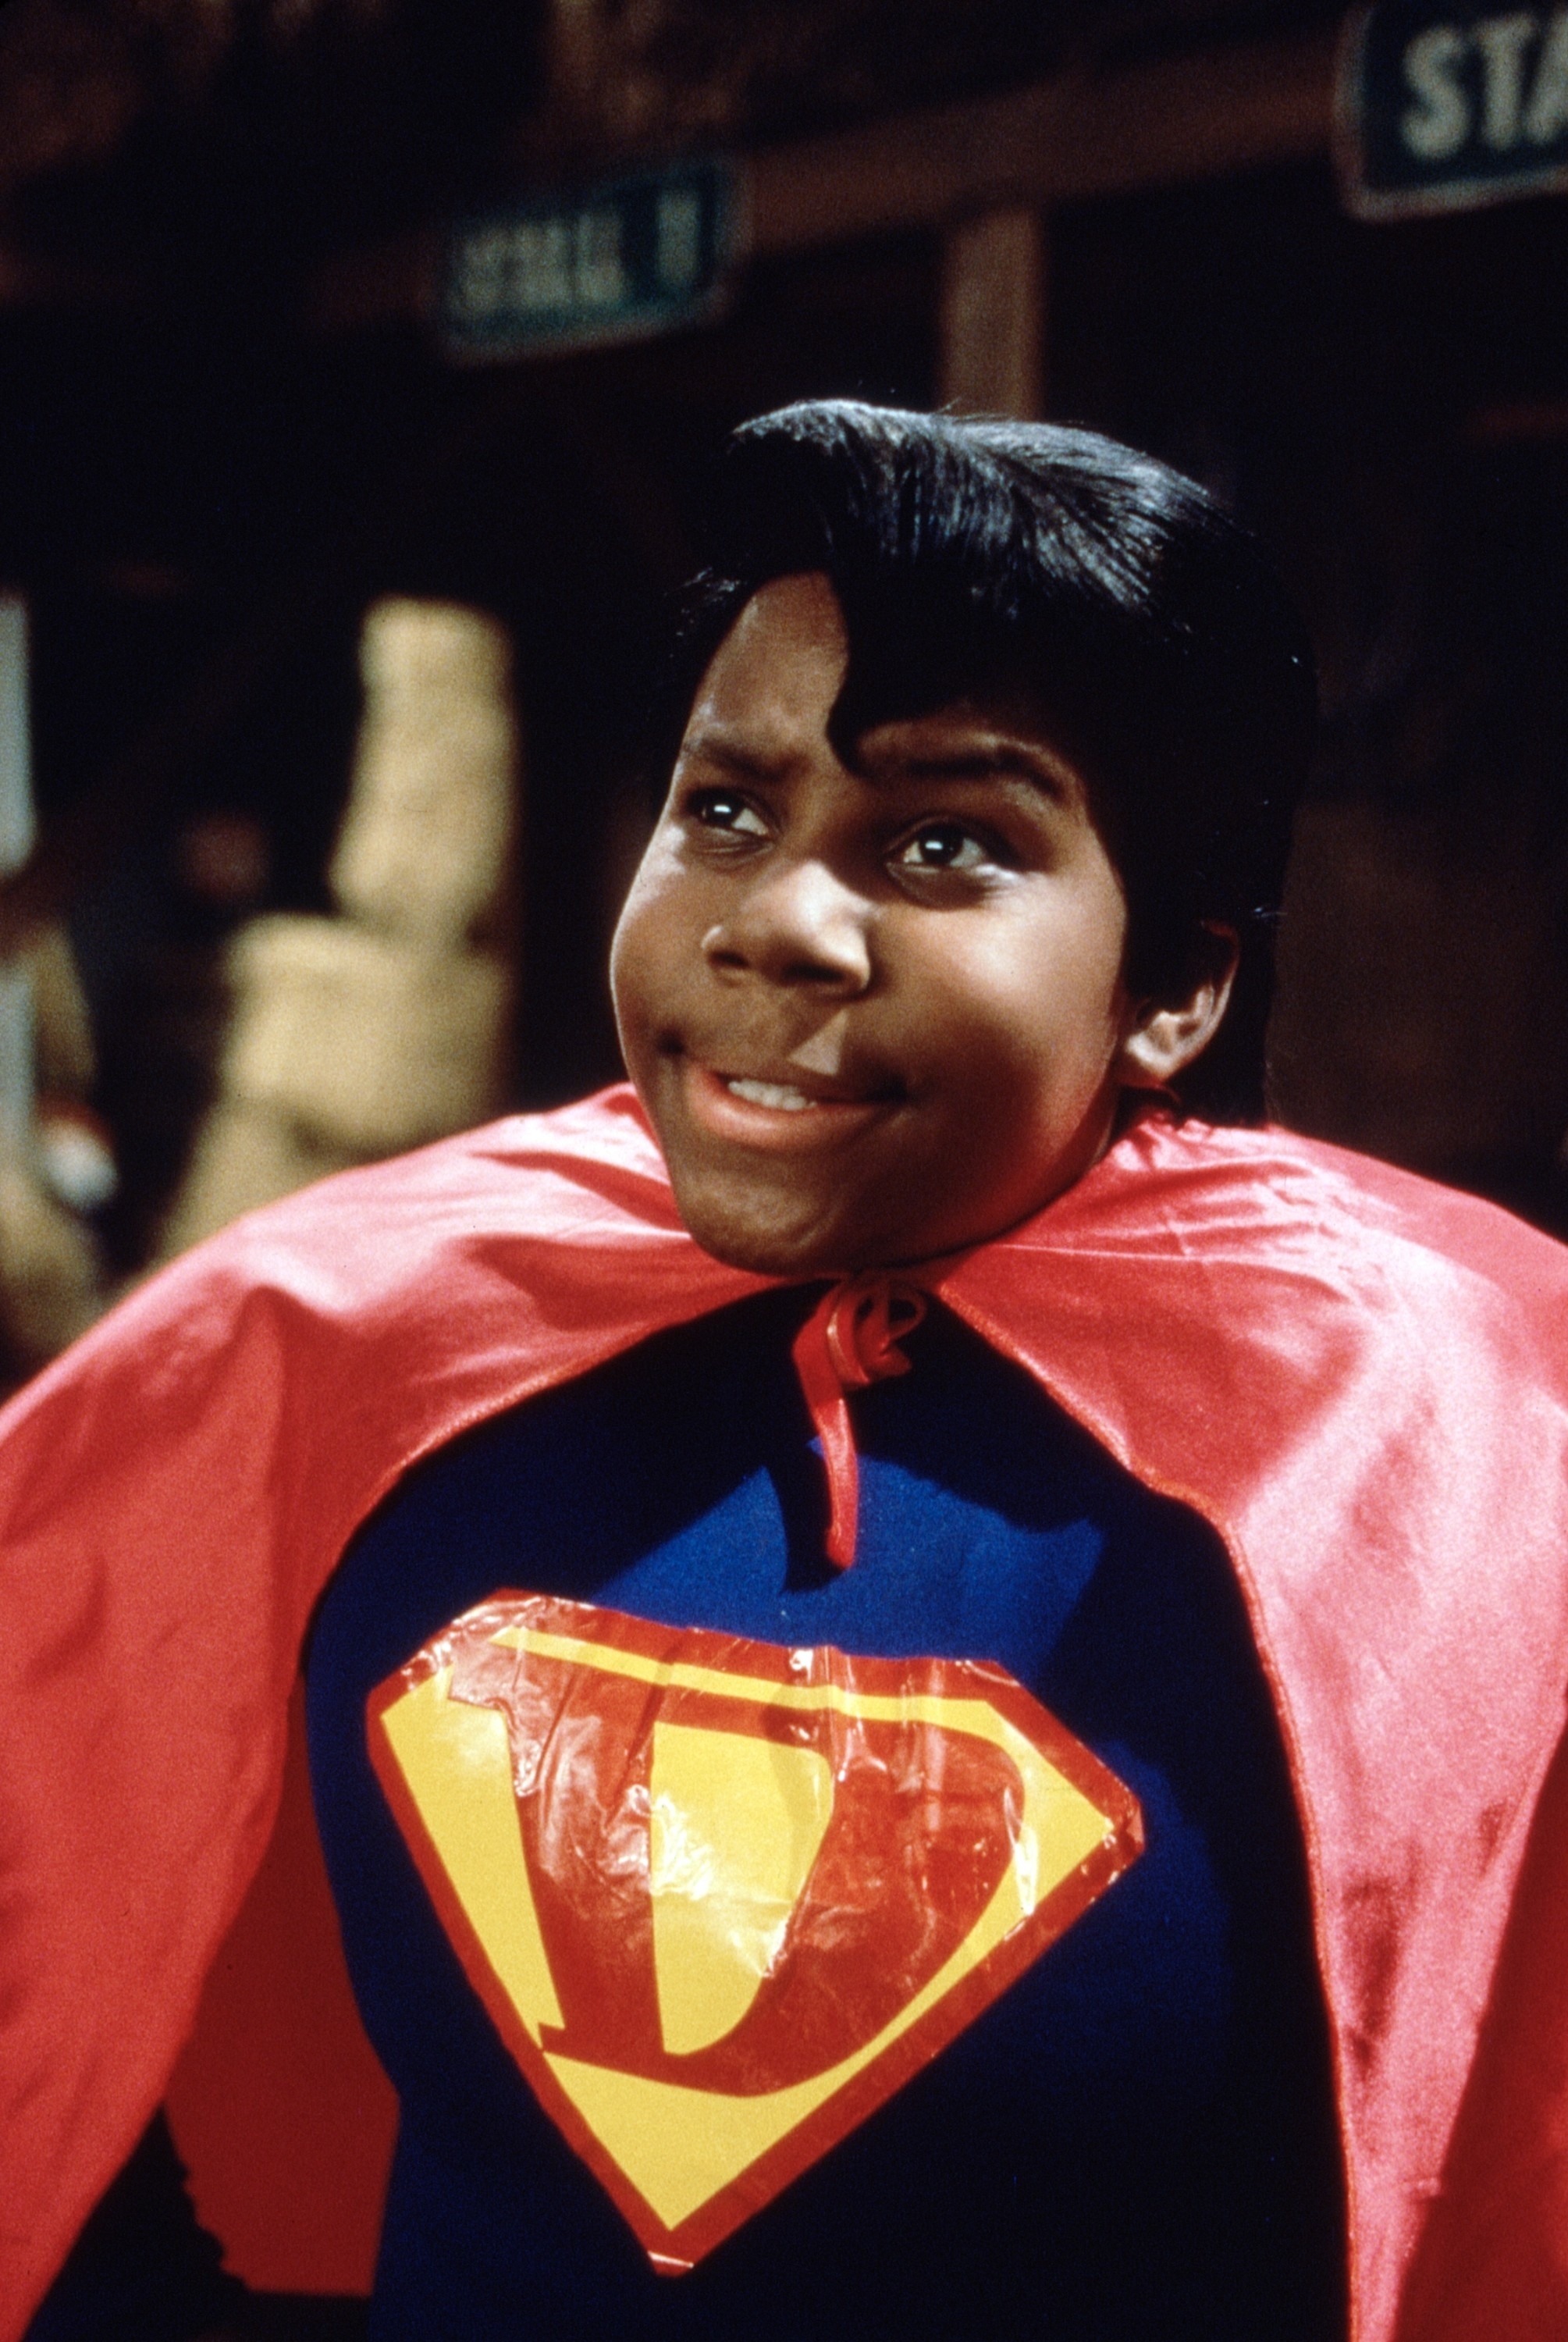 Kenan Thompson dressed as a superhero with a cape and a parody Superman logo on his chest